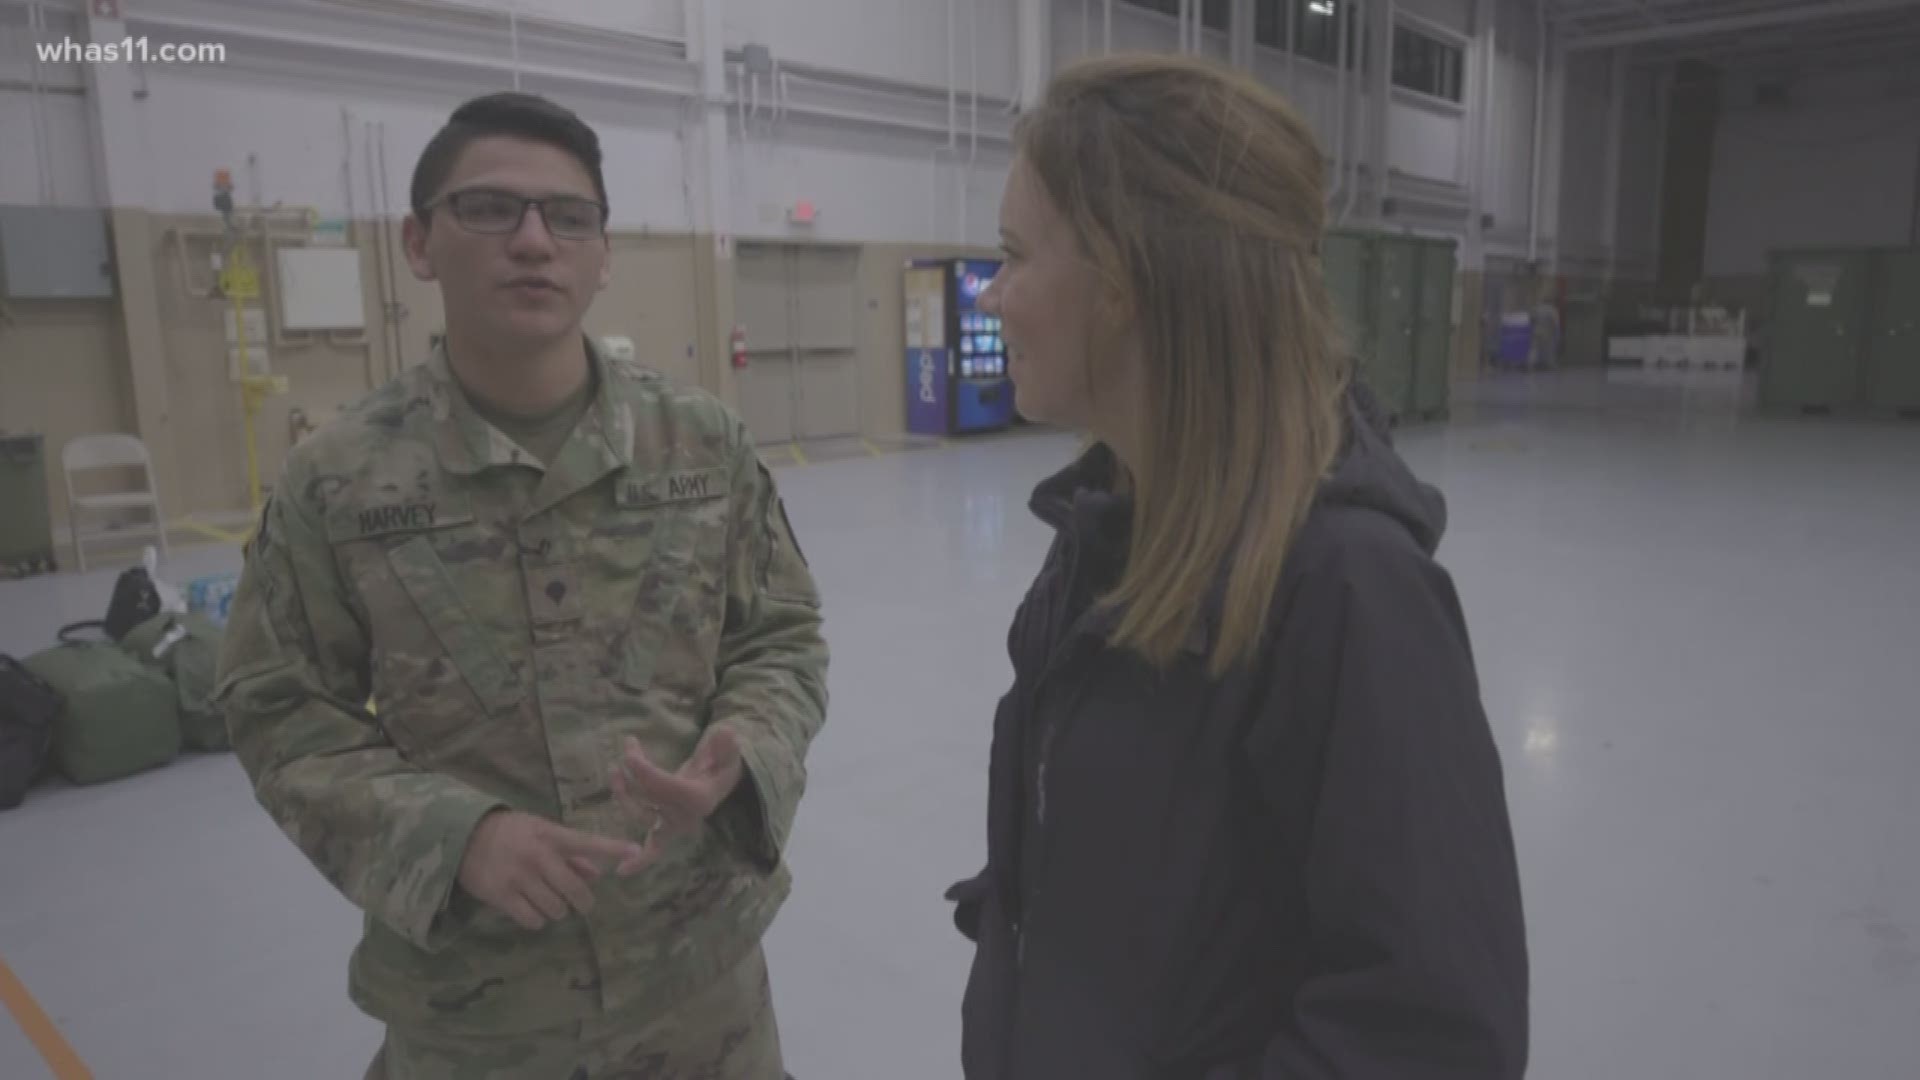 Crews from across the country have headed to the Carolinas to help after Florence, including the Kentucky Army National Guard. The 63rd Theater Aviation Brigade spent a week near Raleigh, North Carolina helping manage aircraft, rescue flood victims, and m